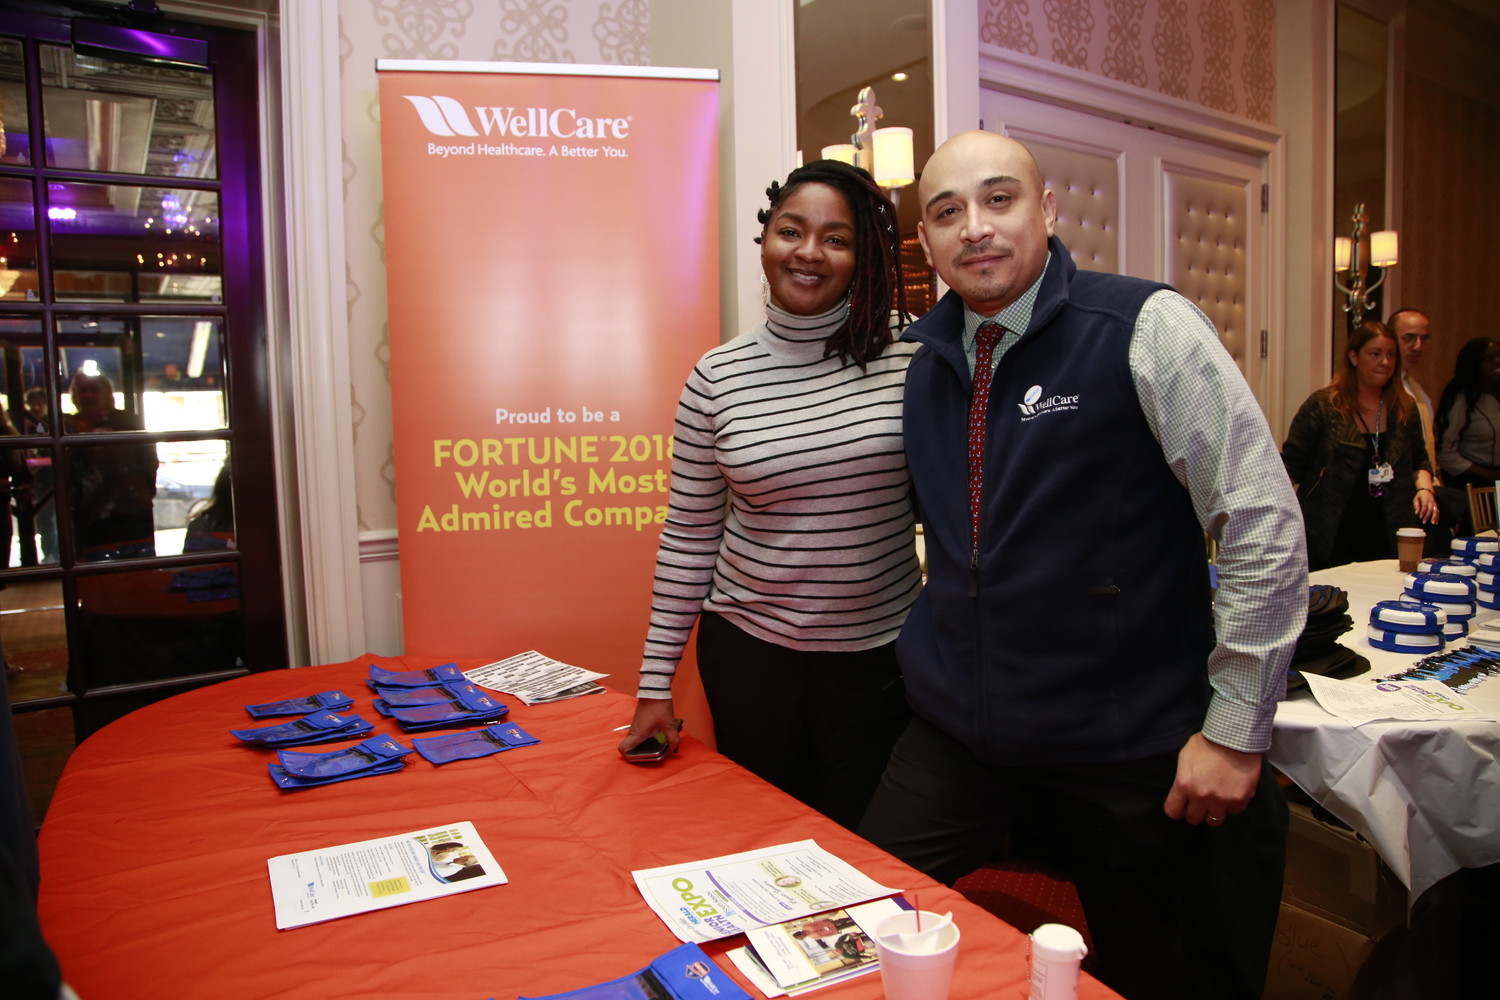 Speaker Walter Aguilar, Director MLTC Assessment & Enrollment, WellCare Health Plans, Inc. with Maza Myrie, marketing and events specialist, during the event.